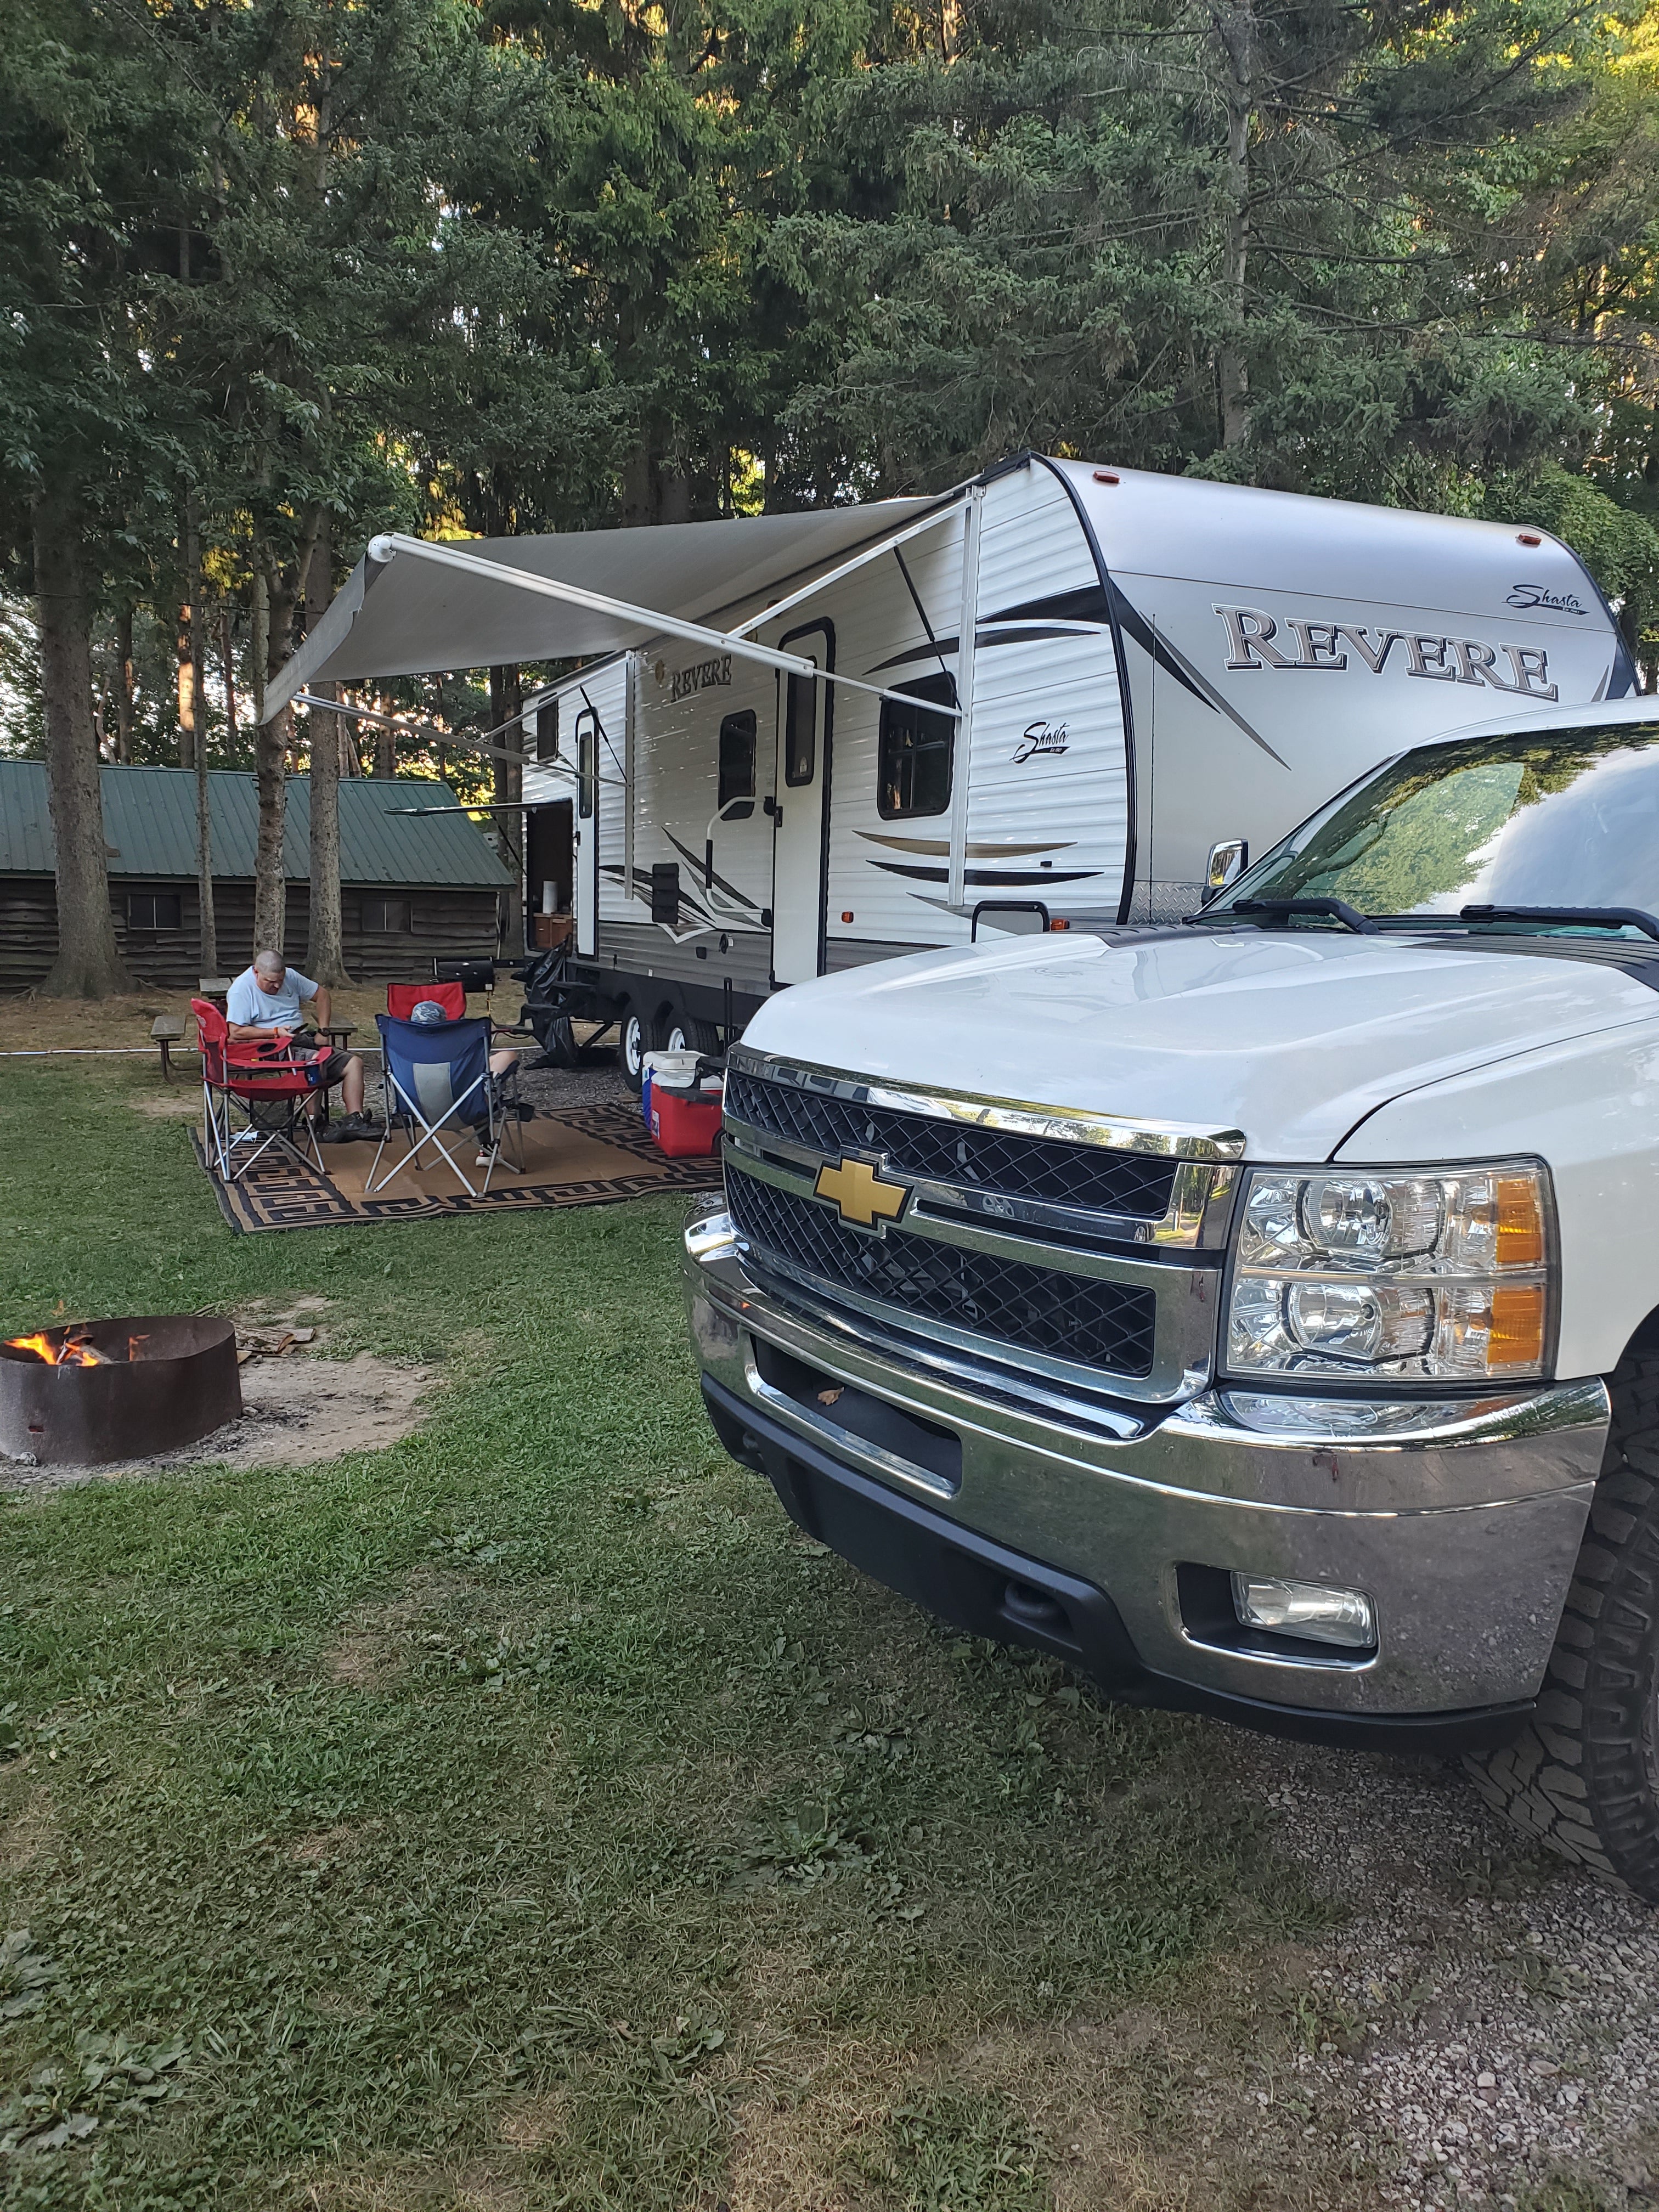 Camper submitted image from Evergreen Lake Park - 2